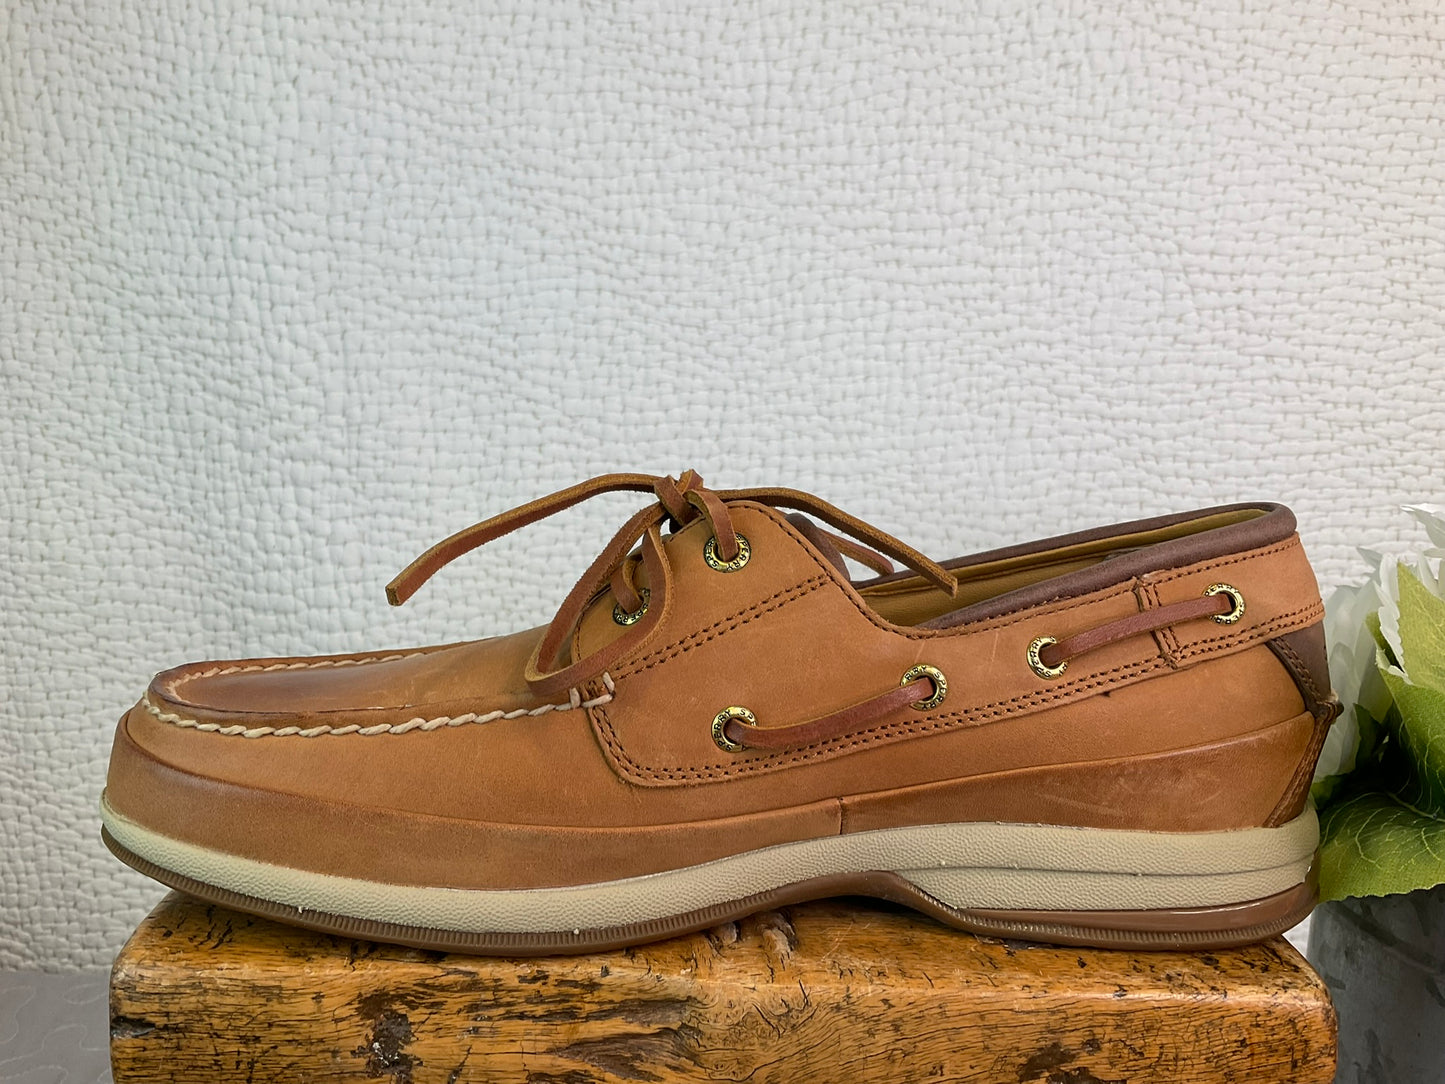 Sperry Men's Gold Cup ASV Boat Shoes, Size 9